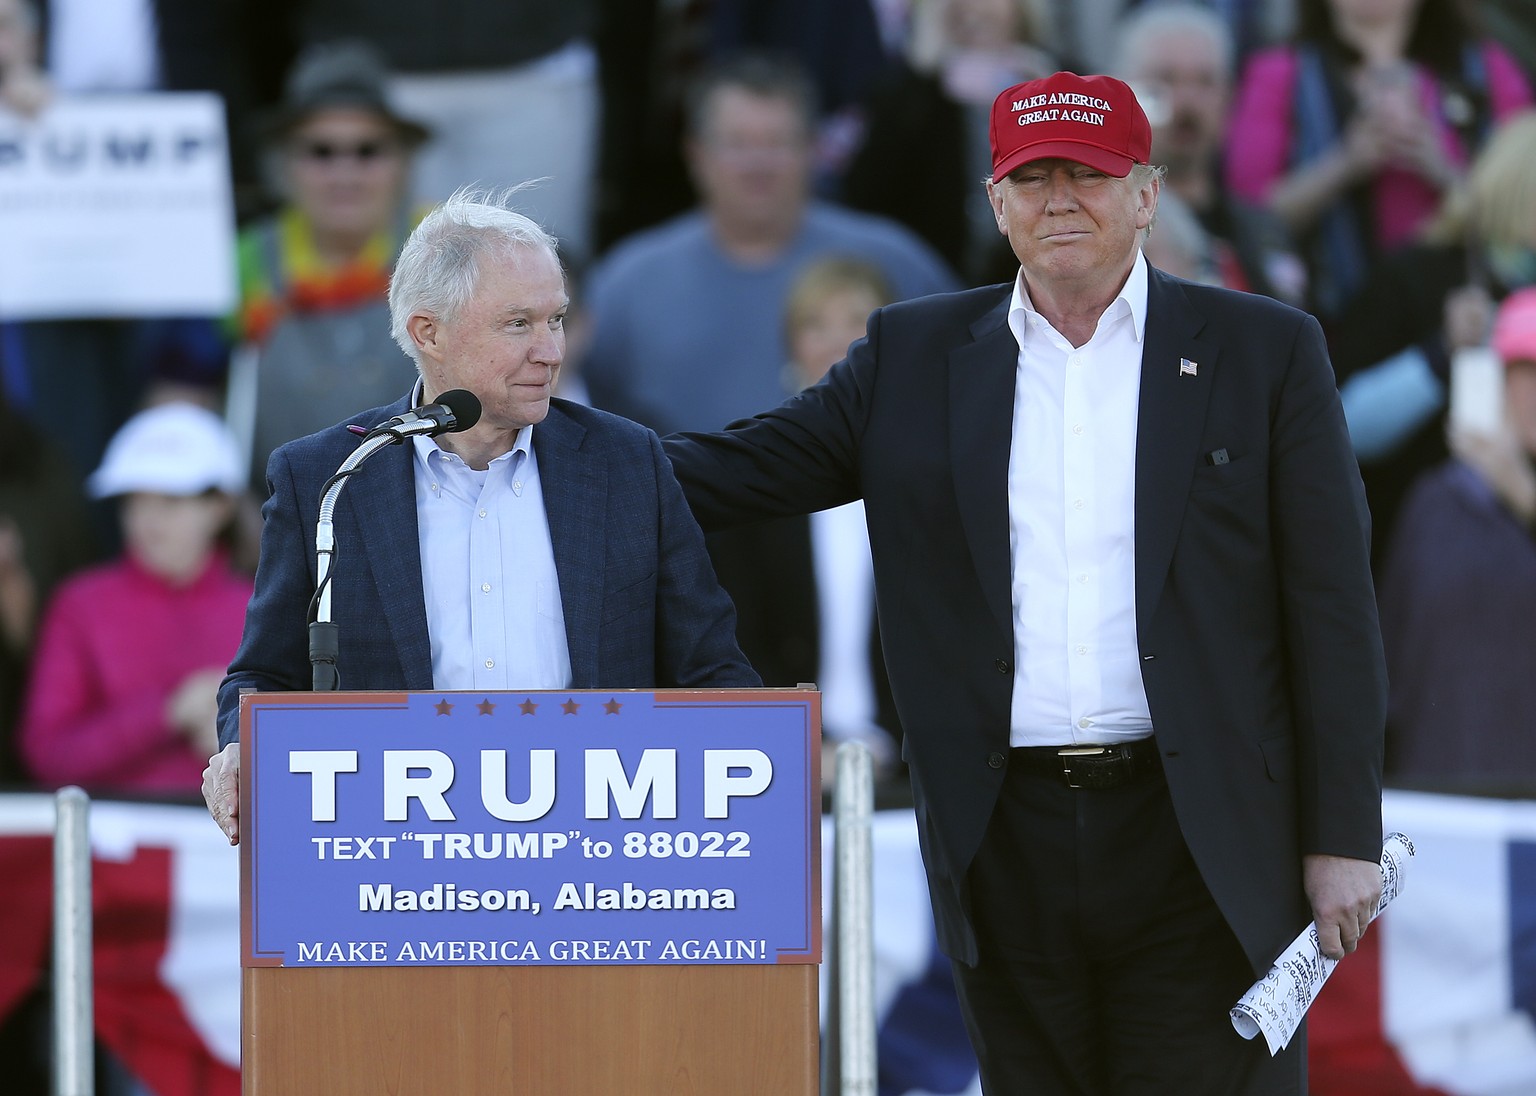 Republican presidential candidate Donald Trump, right, stands next to Sen. Jeff Sessions, R-Ala., as Sessions speaks during a rally Sunday, Feb. 28, 2016, in Madison, Ala. (AP Photo/John Bazemore)